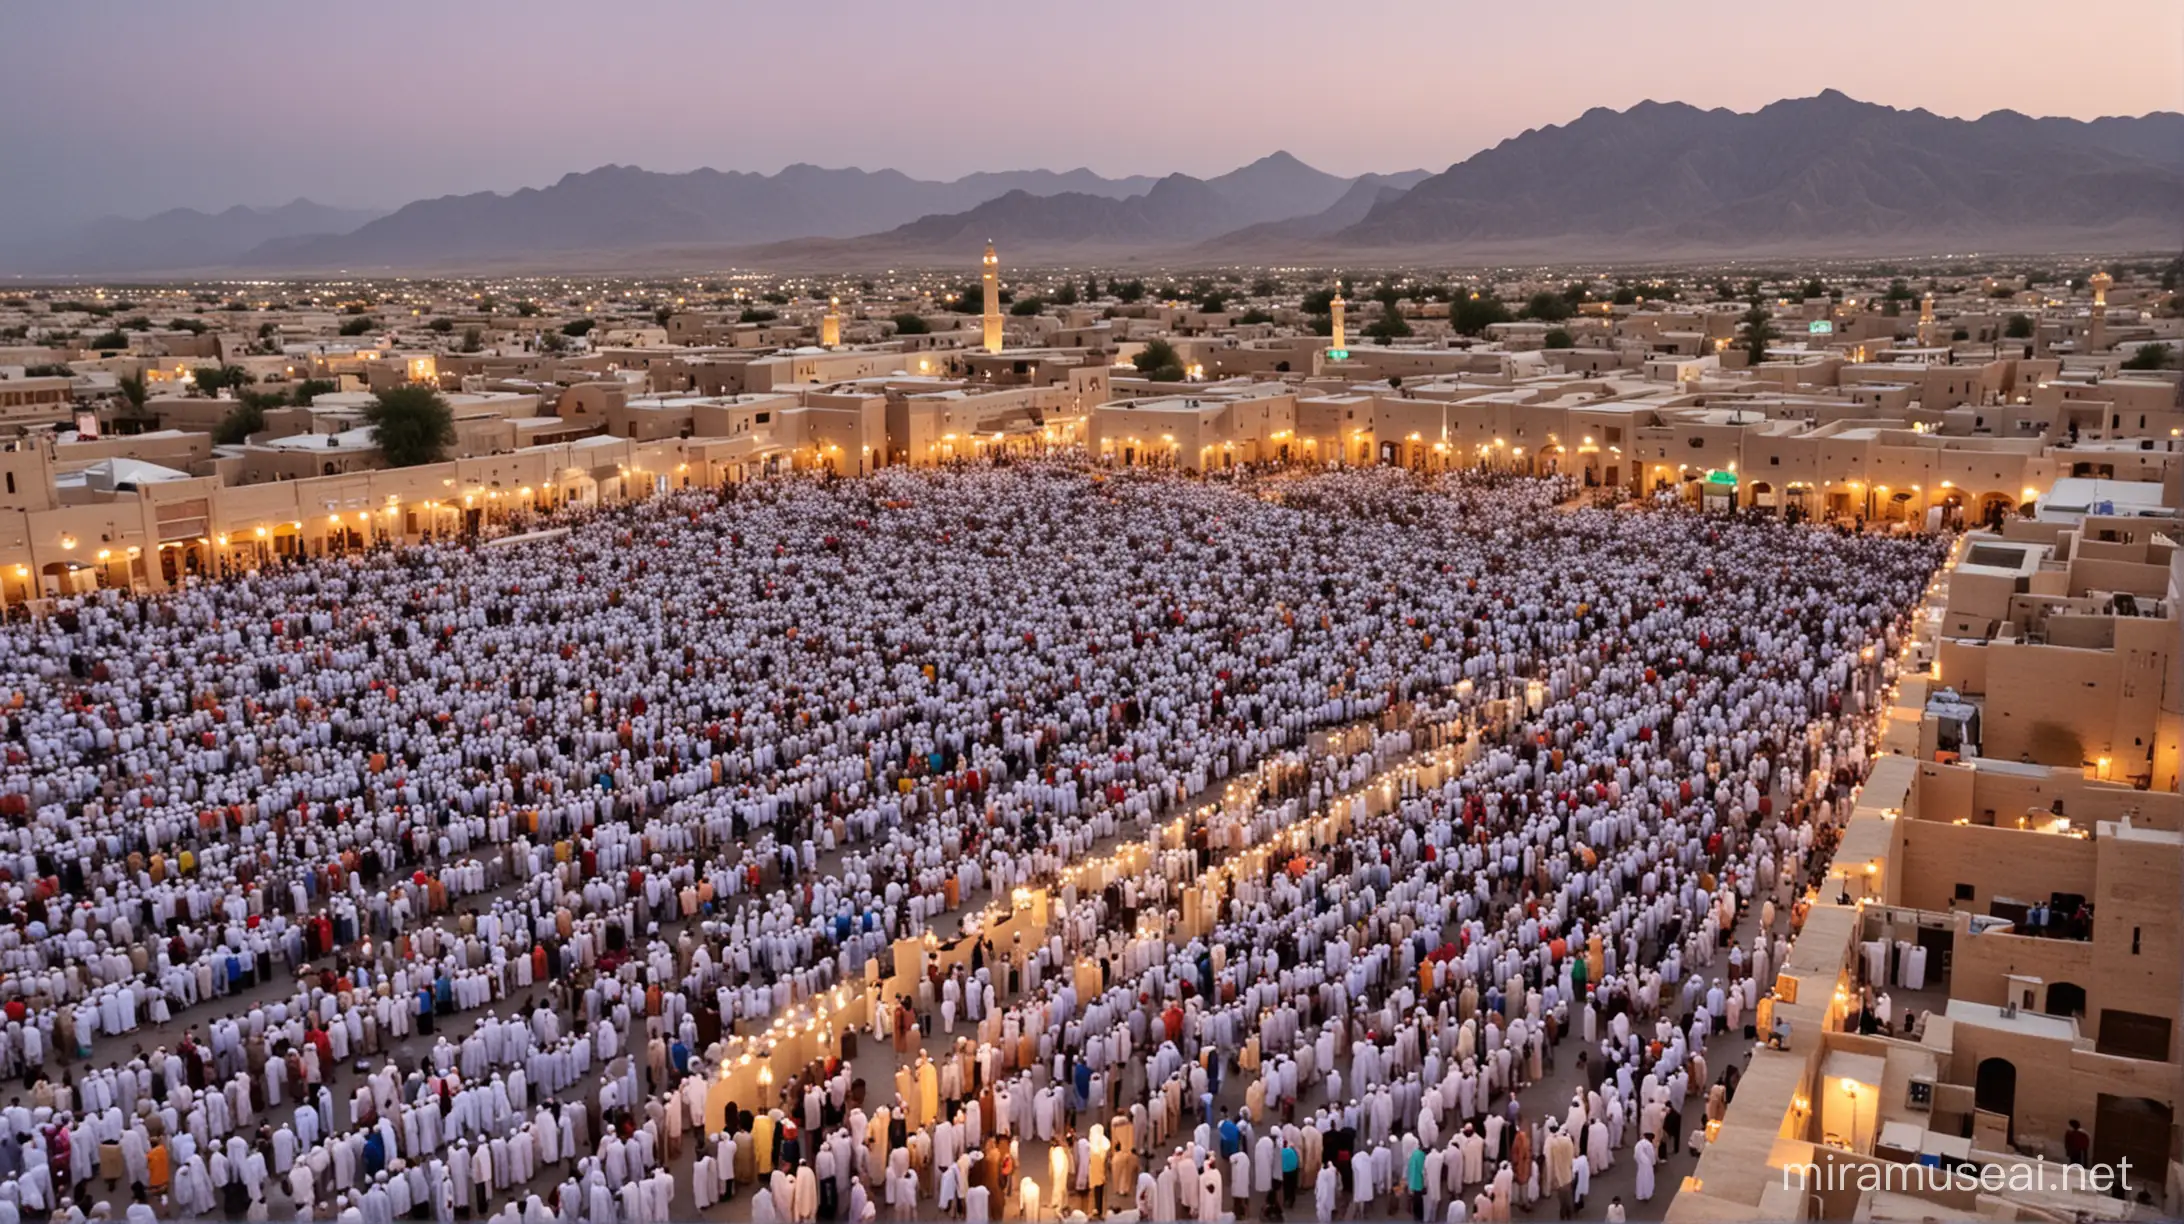 Colorful Eid Celebrations in Nizwa Vibrant Festivities and Traditions